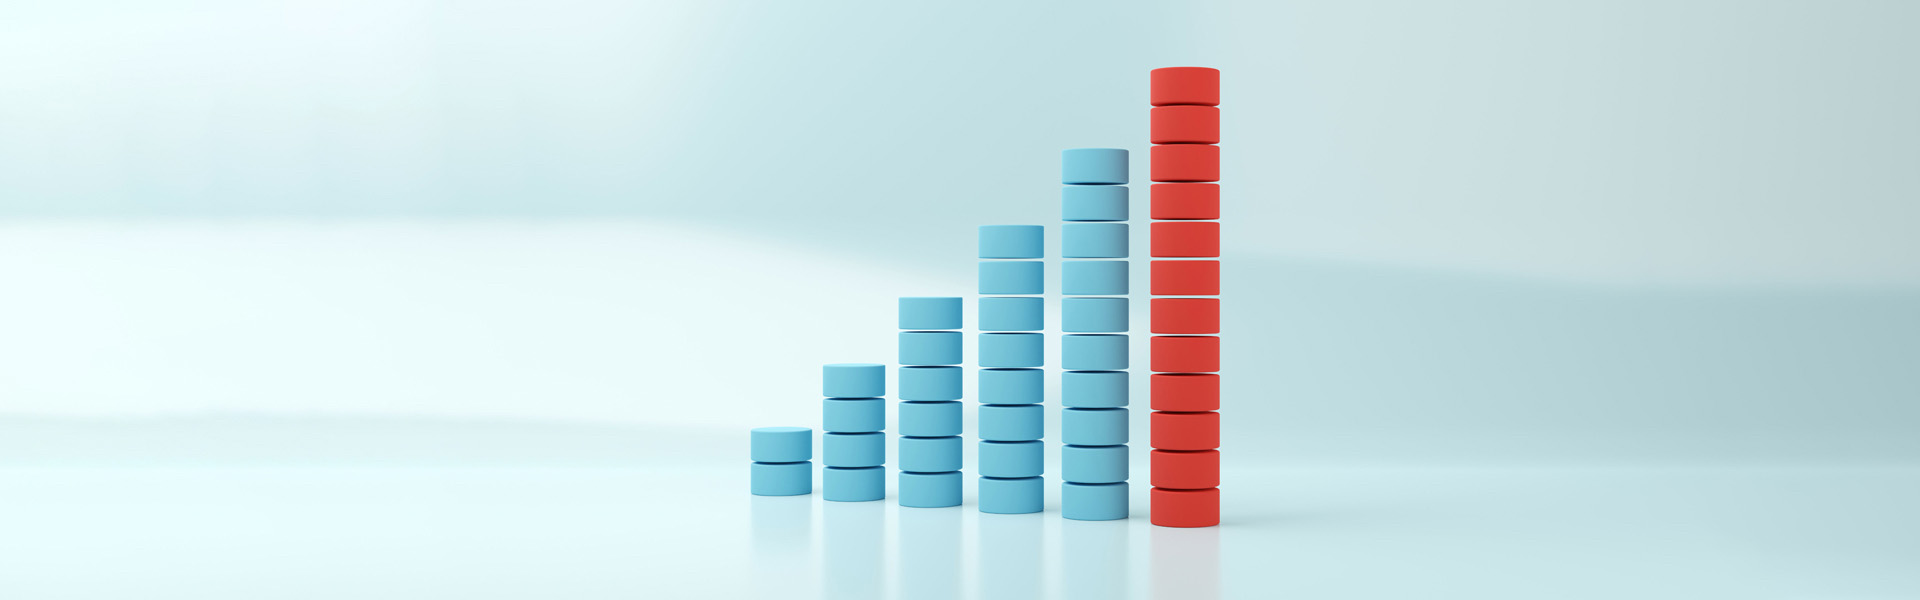 Rising bar graph of blue cylinders with last one red on blue background, abstract modern minimal success, growth, progress or achievement concept.